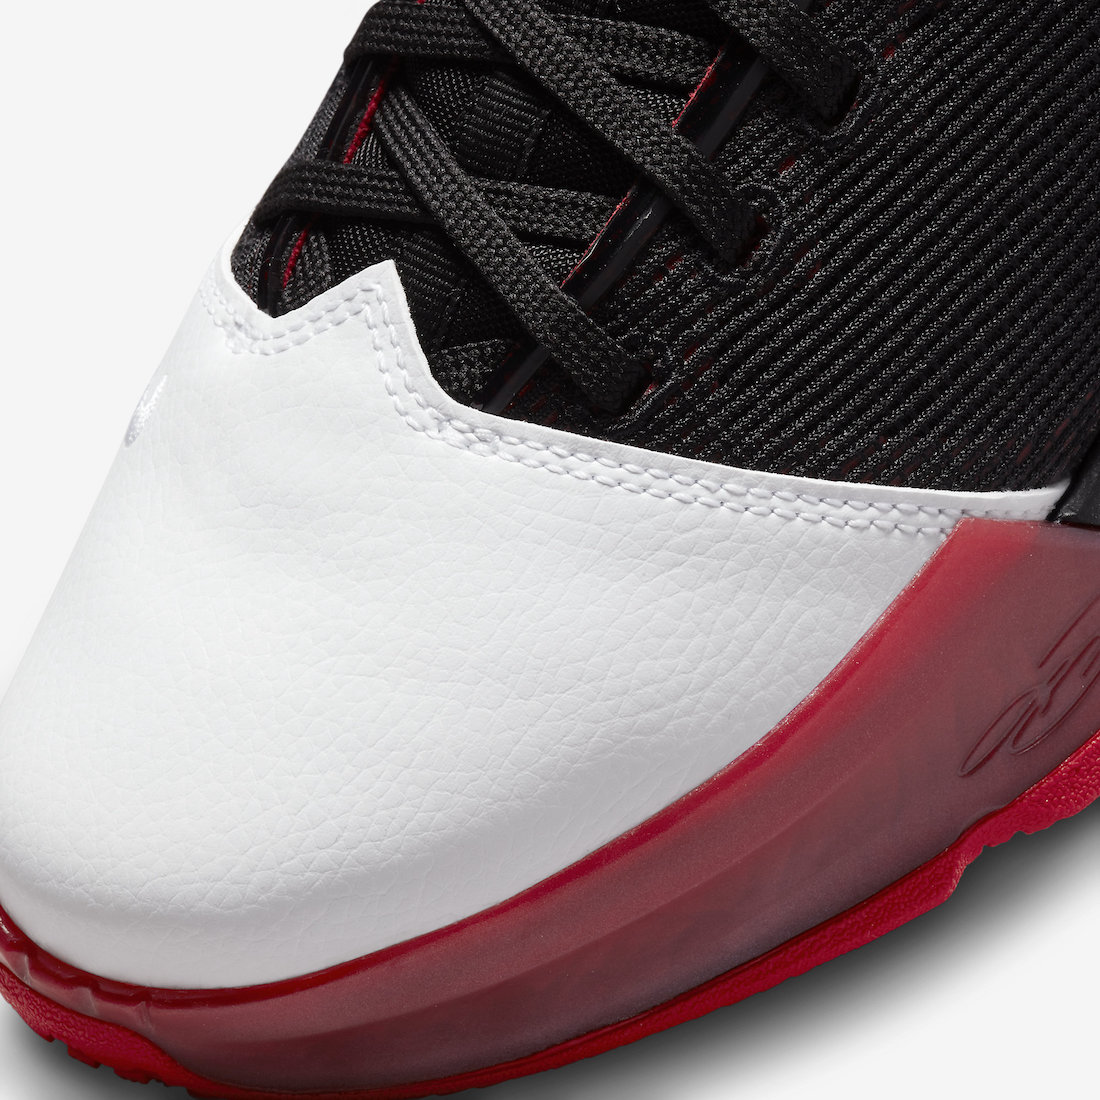 Nike LeBron 19 Low Bred DH1270-001 Release Date